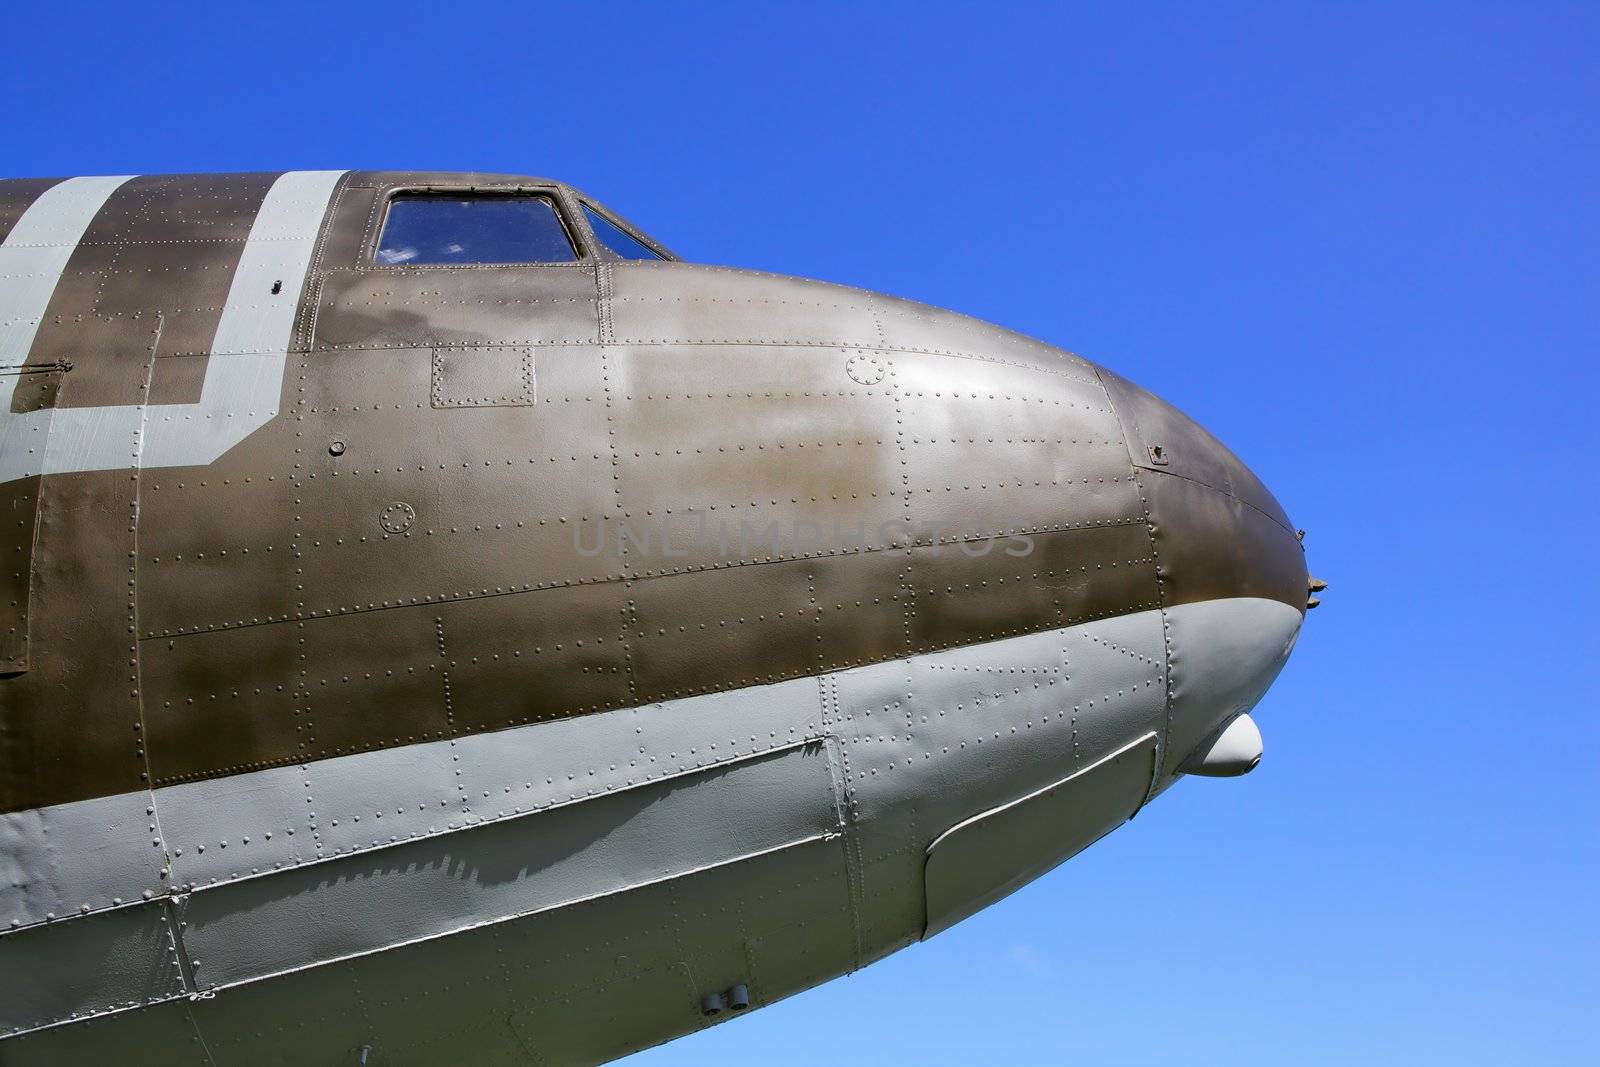 WW II transport airplane nose showing dramatic contours with blue sky background